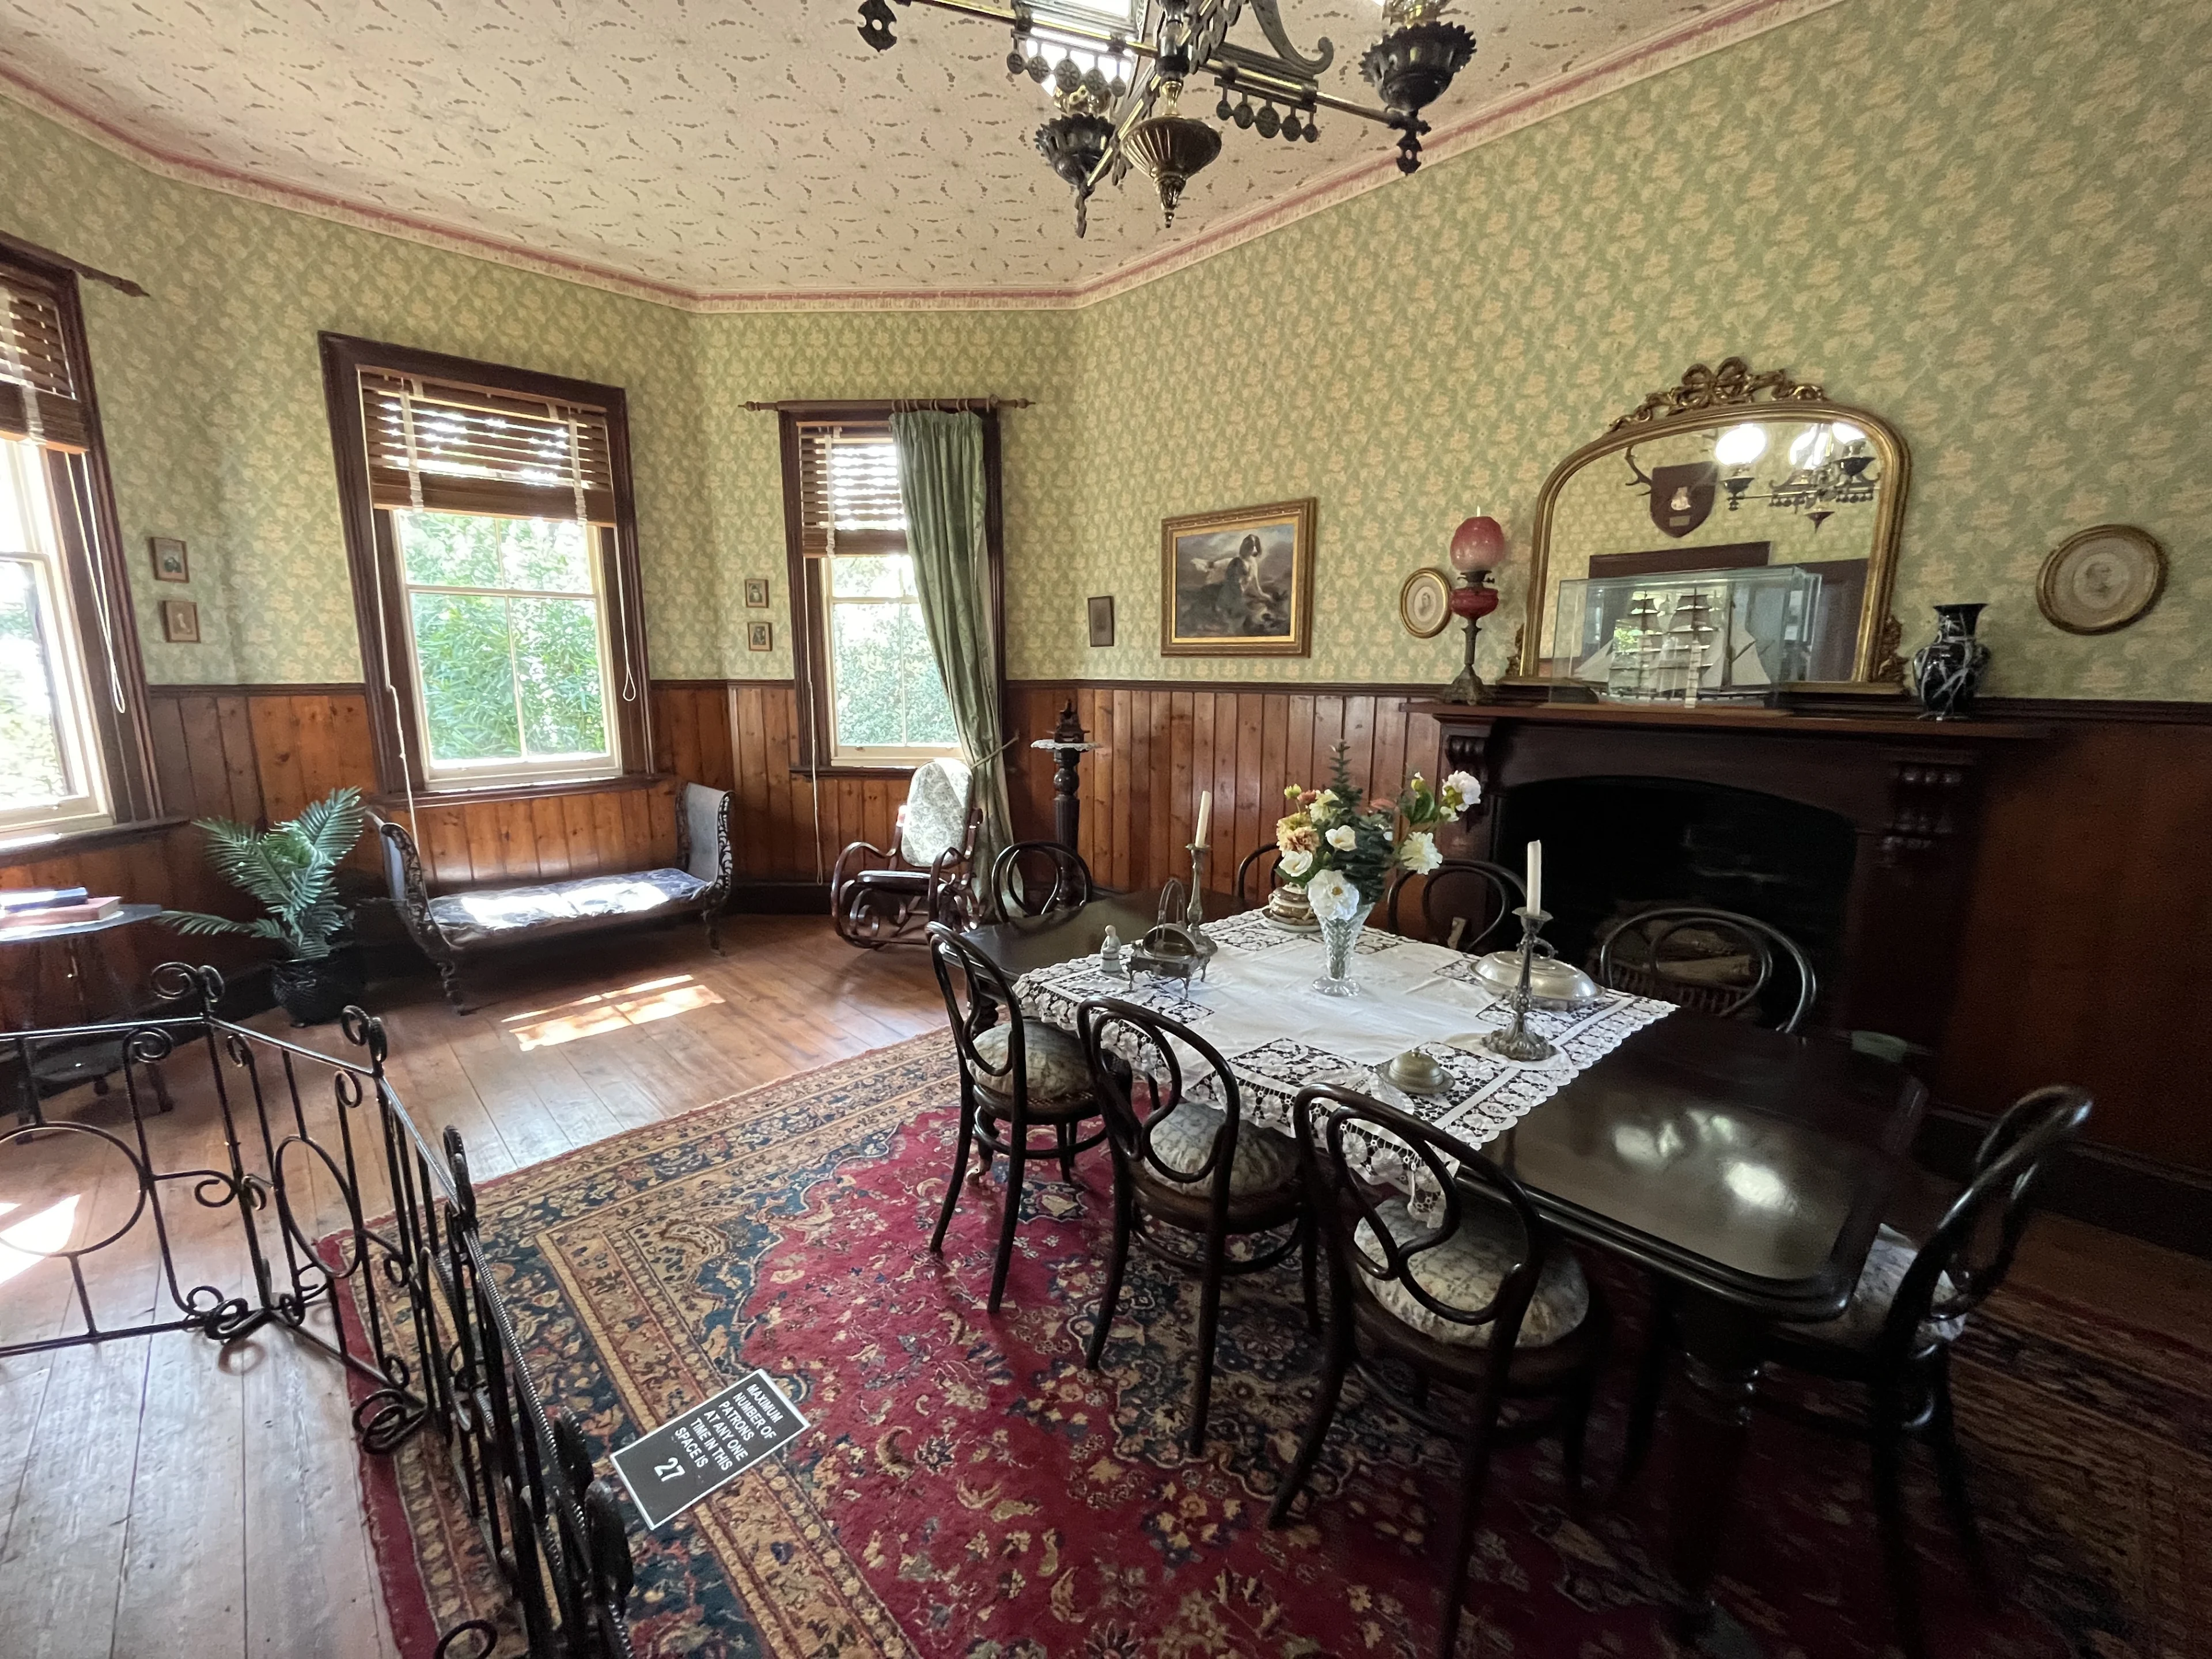 A restored room from the 19th century at Churchill Island, Phillip Island, Victoria.